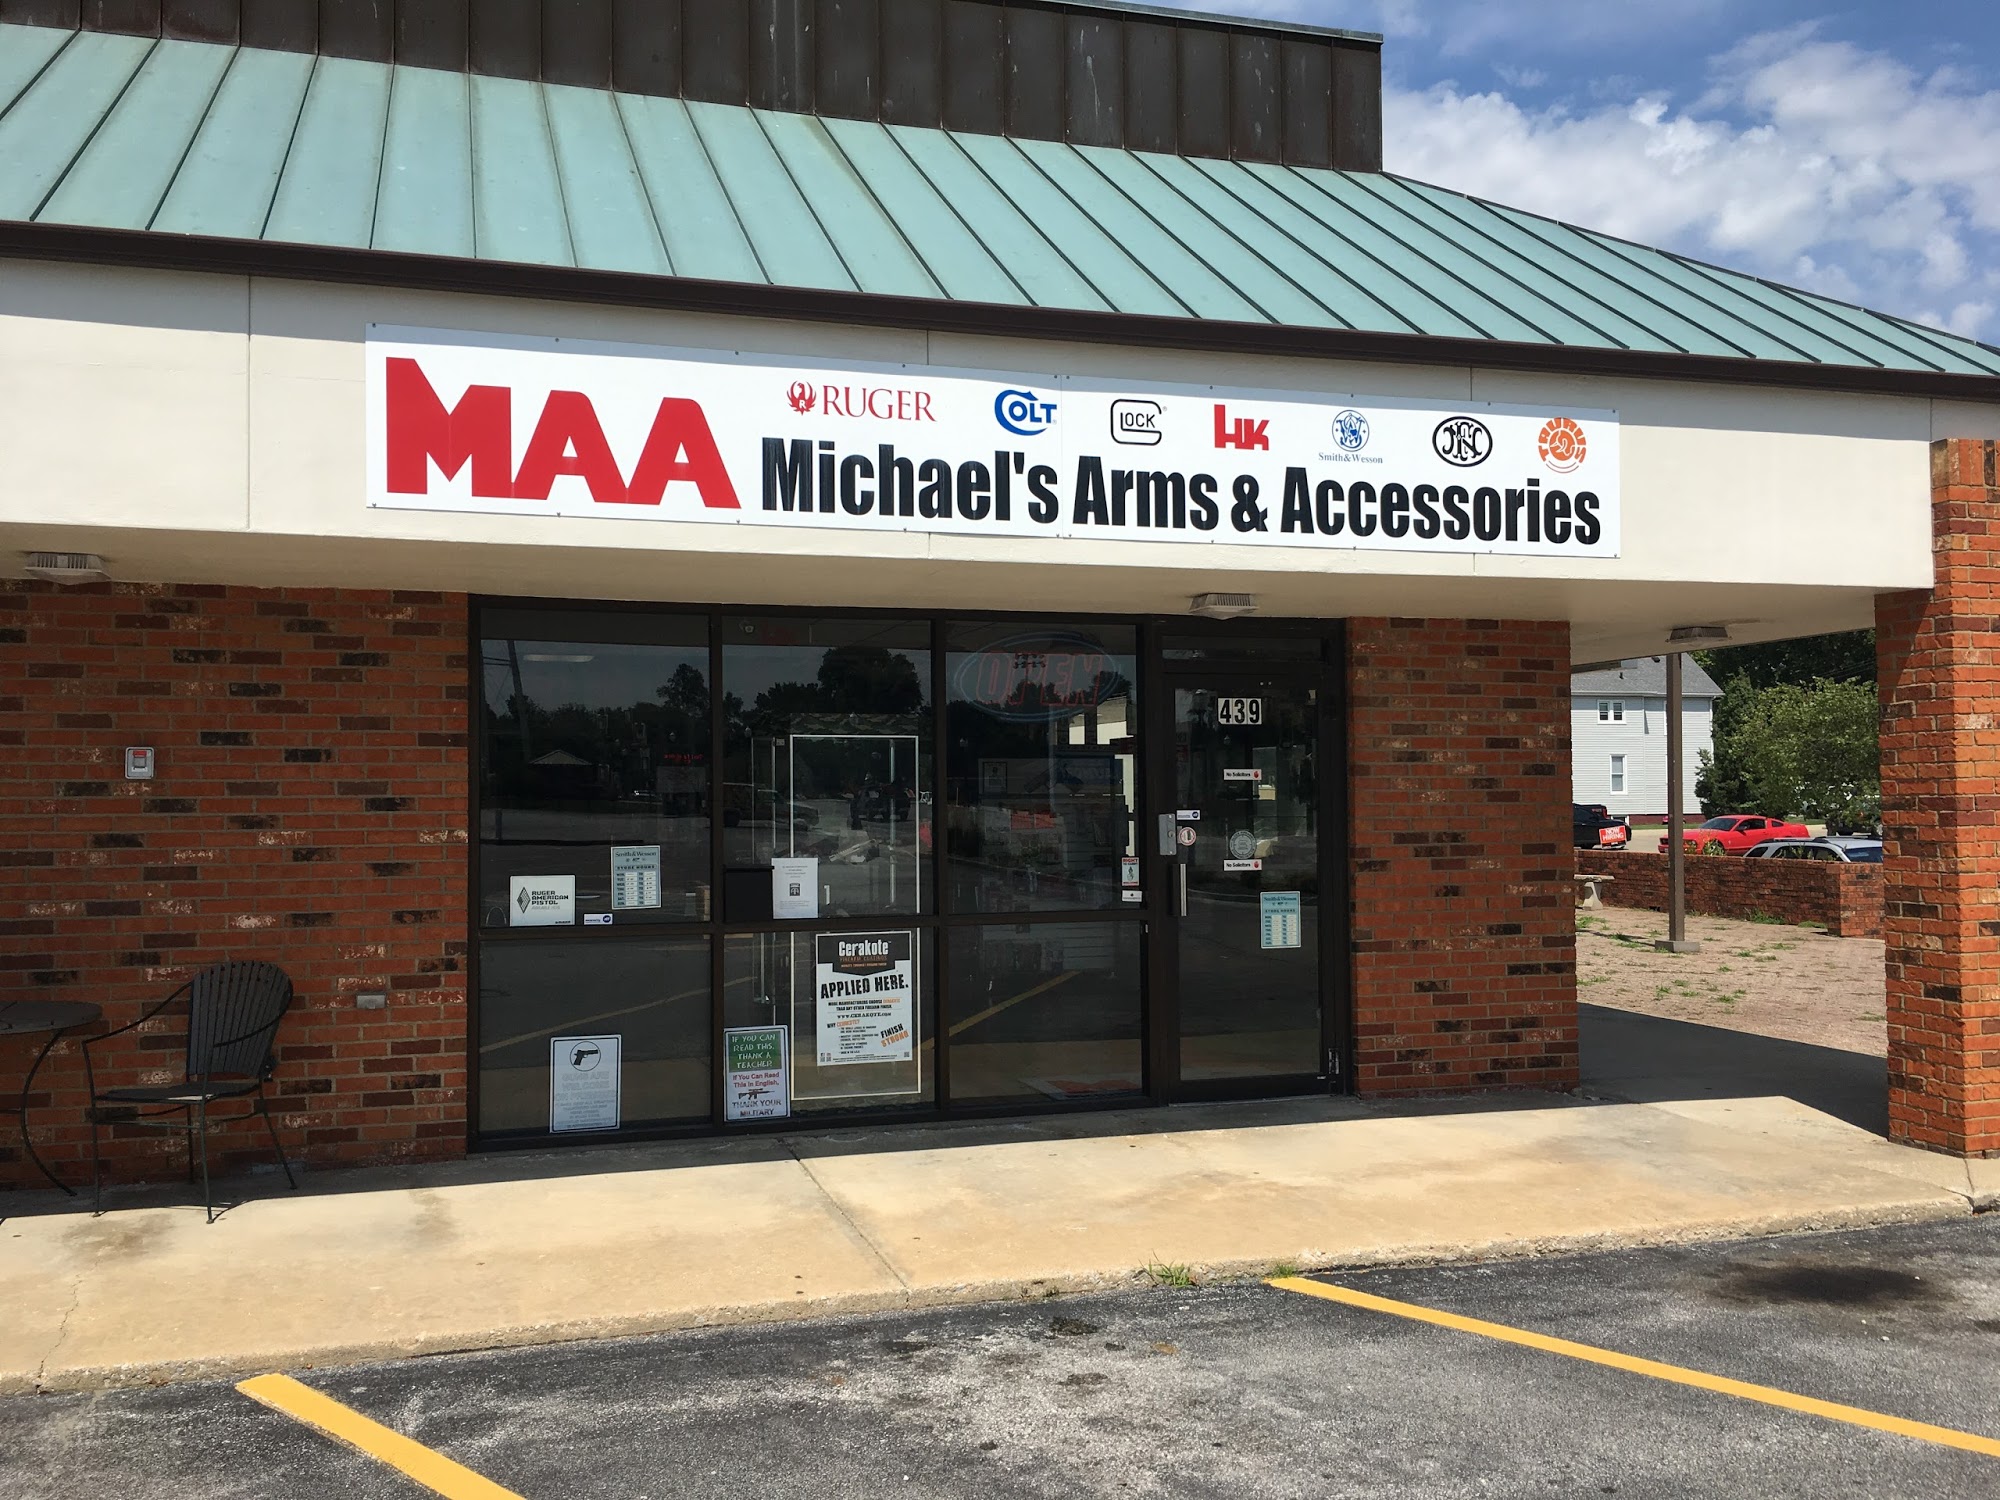 Michaels Arms & Accessories